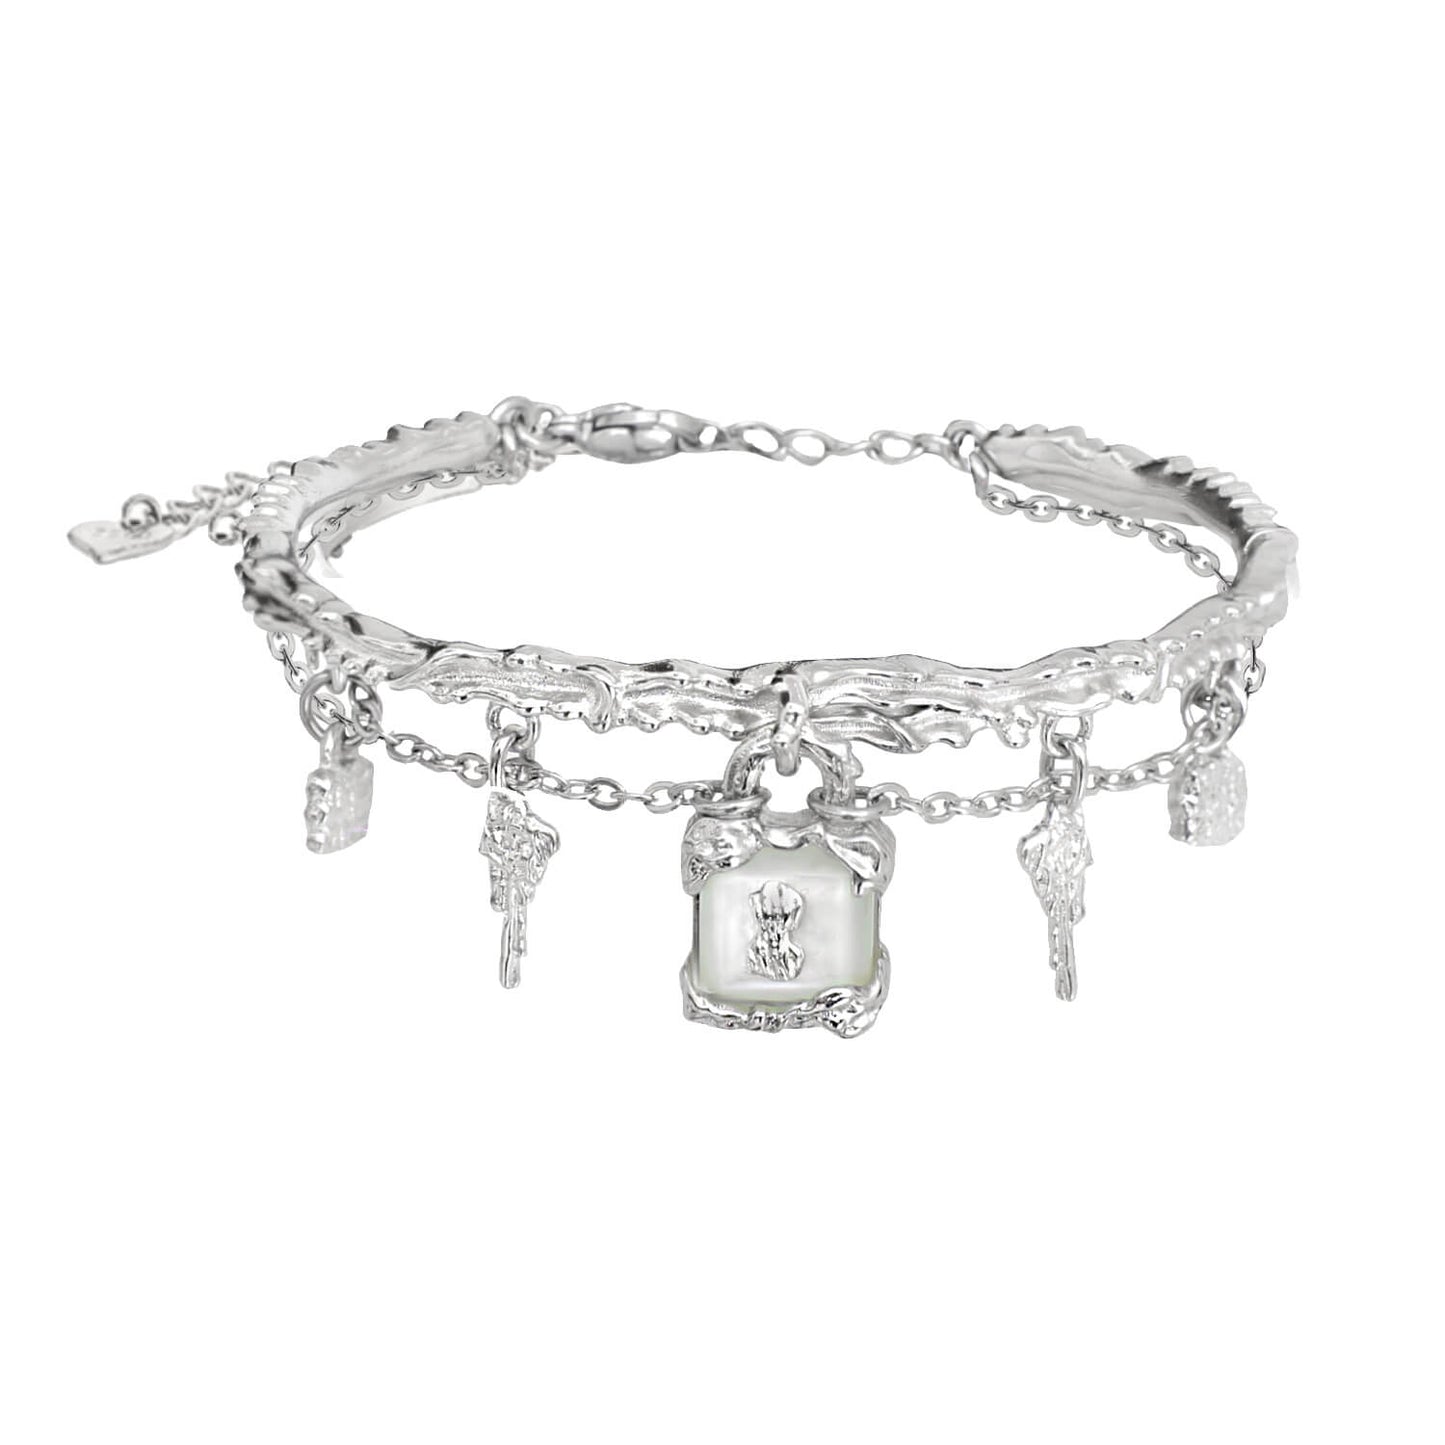 This bracelet is a testament to meticulous craftsmanship. It's made from white gold-plated copper, ensuring both quality and style. With a length of approximately 25cm, including a 5cm extension chain, it offers flexibility in wear. The bracelet weighs about 16.5g, providing a comfortable and lightweight experience.